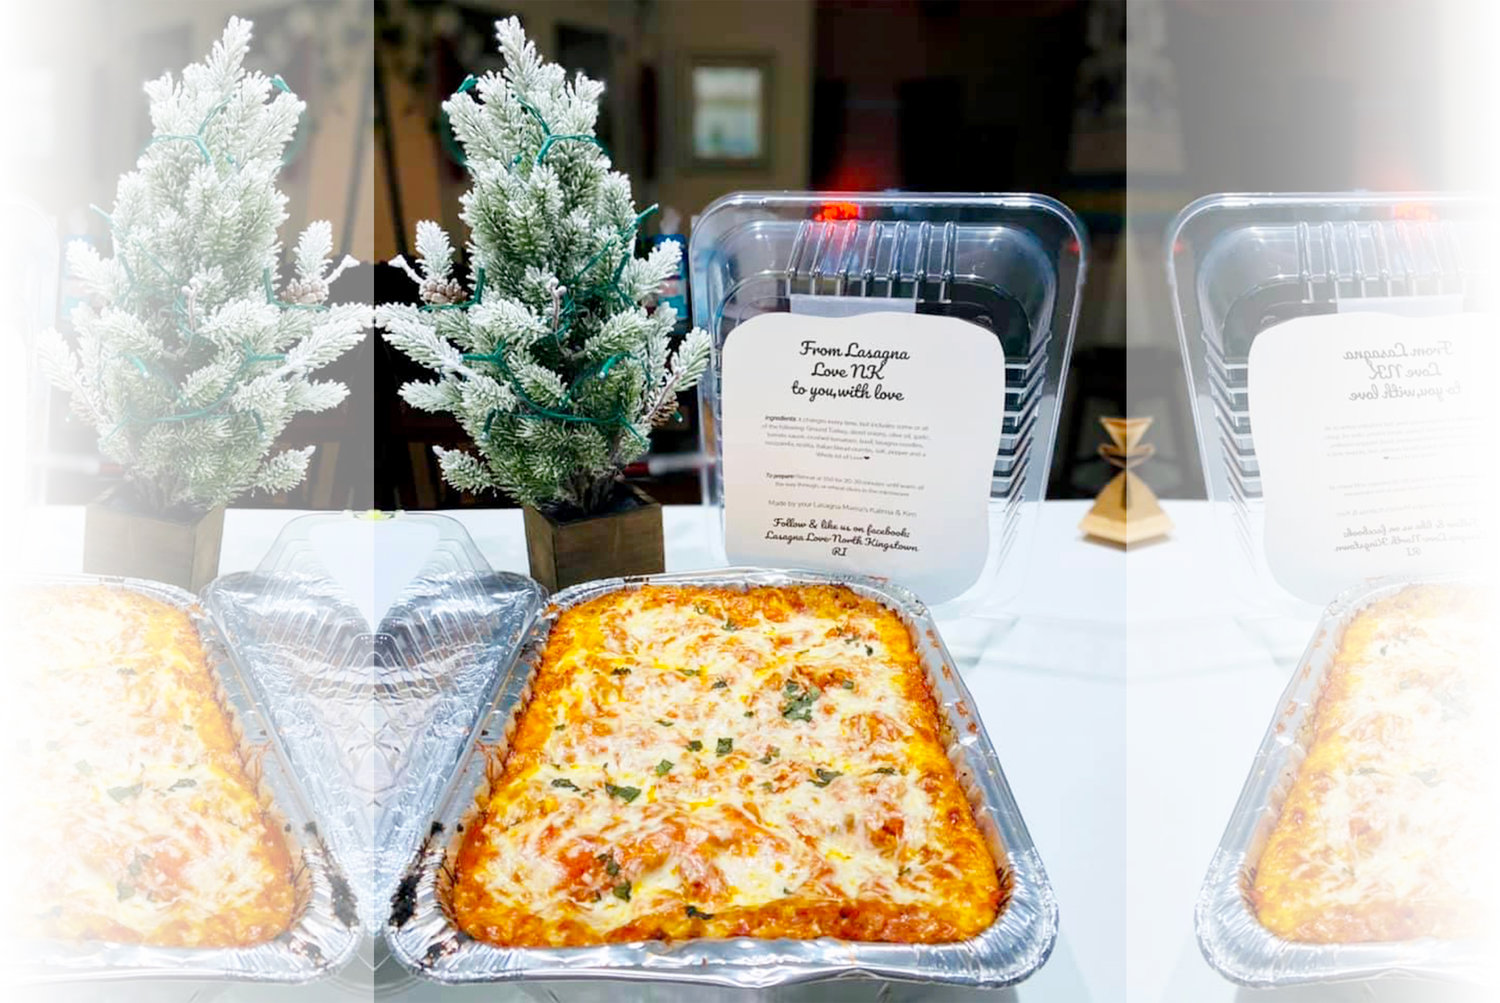 Lasagna Love spreads good cheer with home-cooked meals